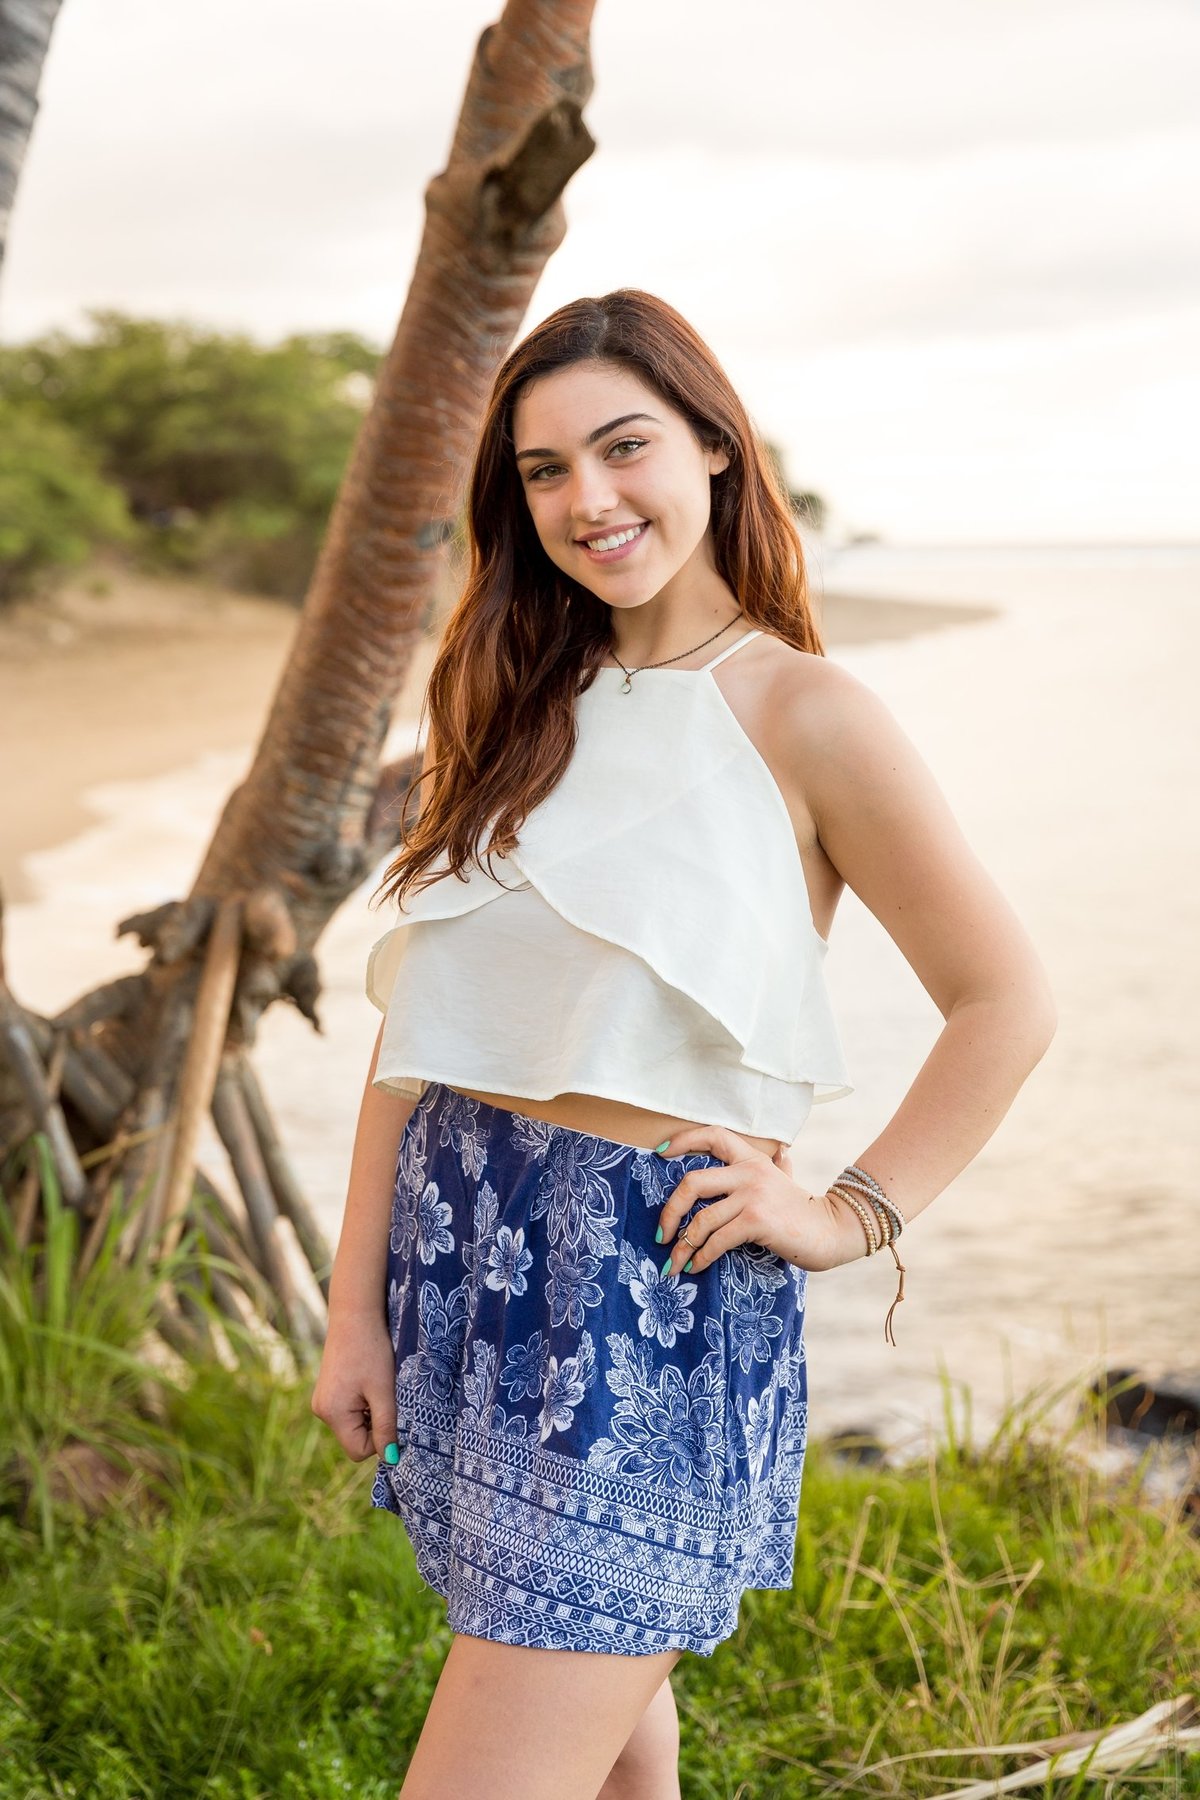 Capture Aloha Photography, Maui Senior Portrait Photography Woman in White with blue skirt at the beach